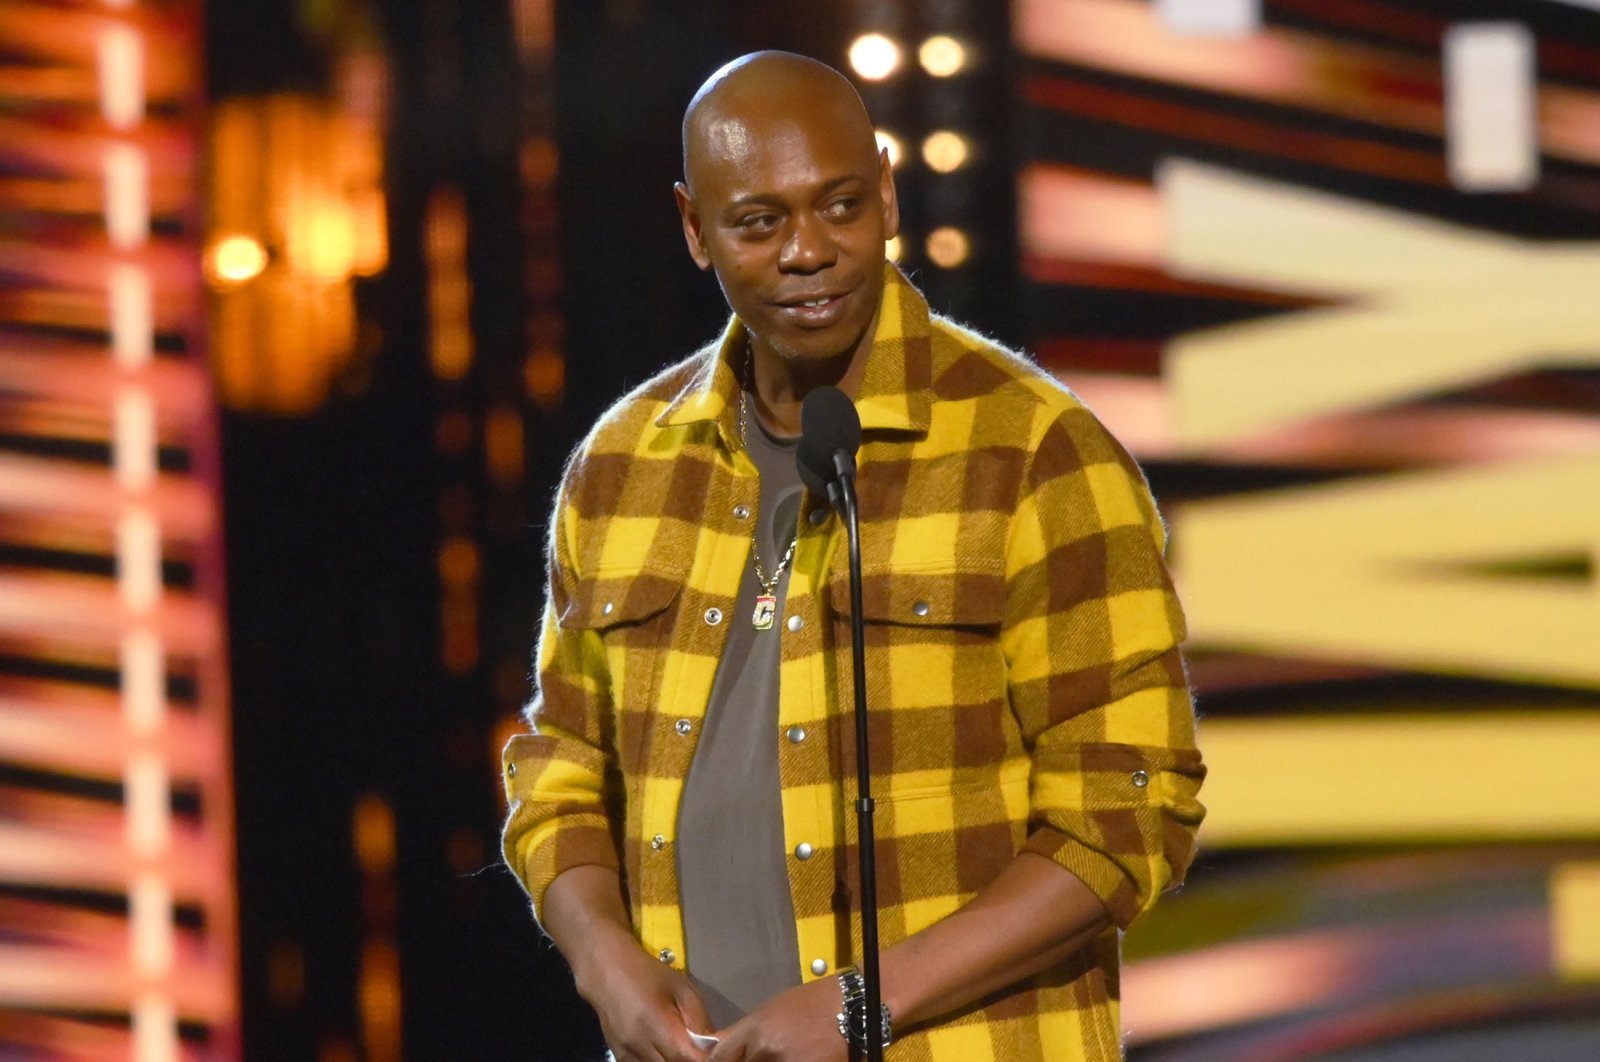 Comedian Dave Chappelle appears during the Rock &amp; Roll Hall of Fame induction ceremony, in Cleveland, U.S., Oct. 30, 2021. (AP Photo)